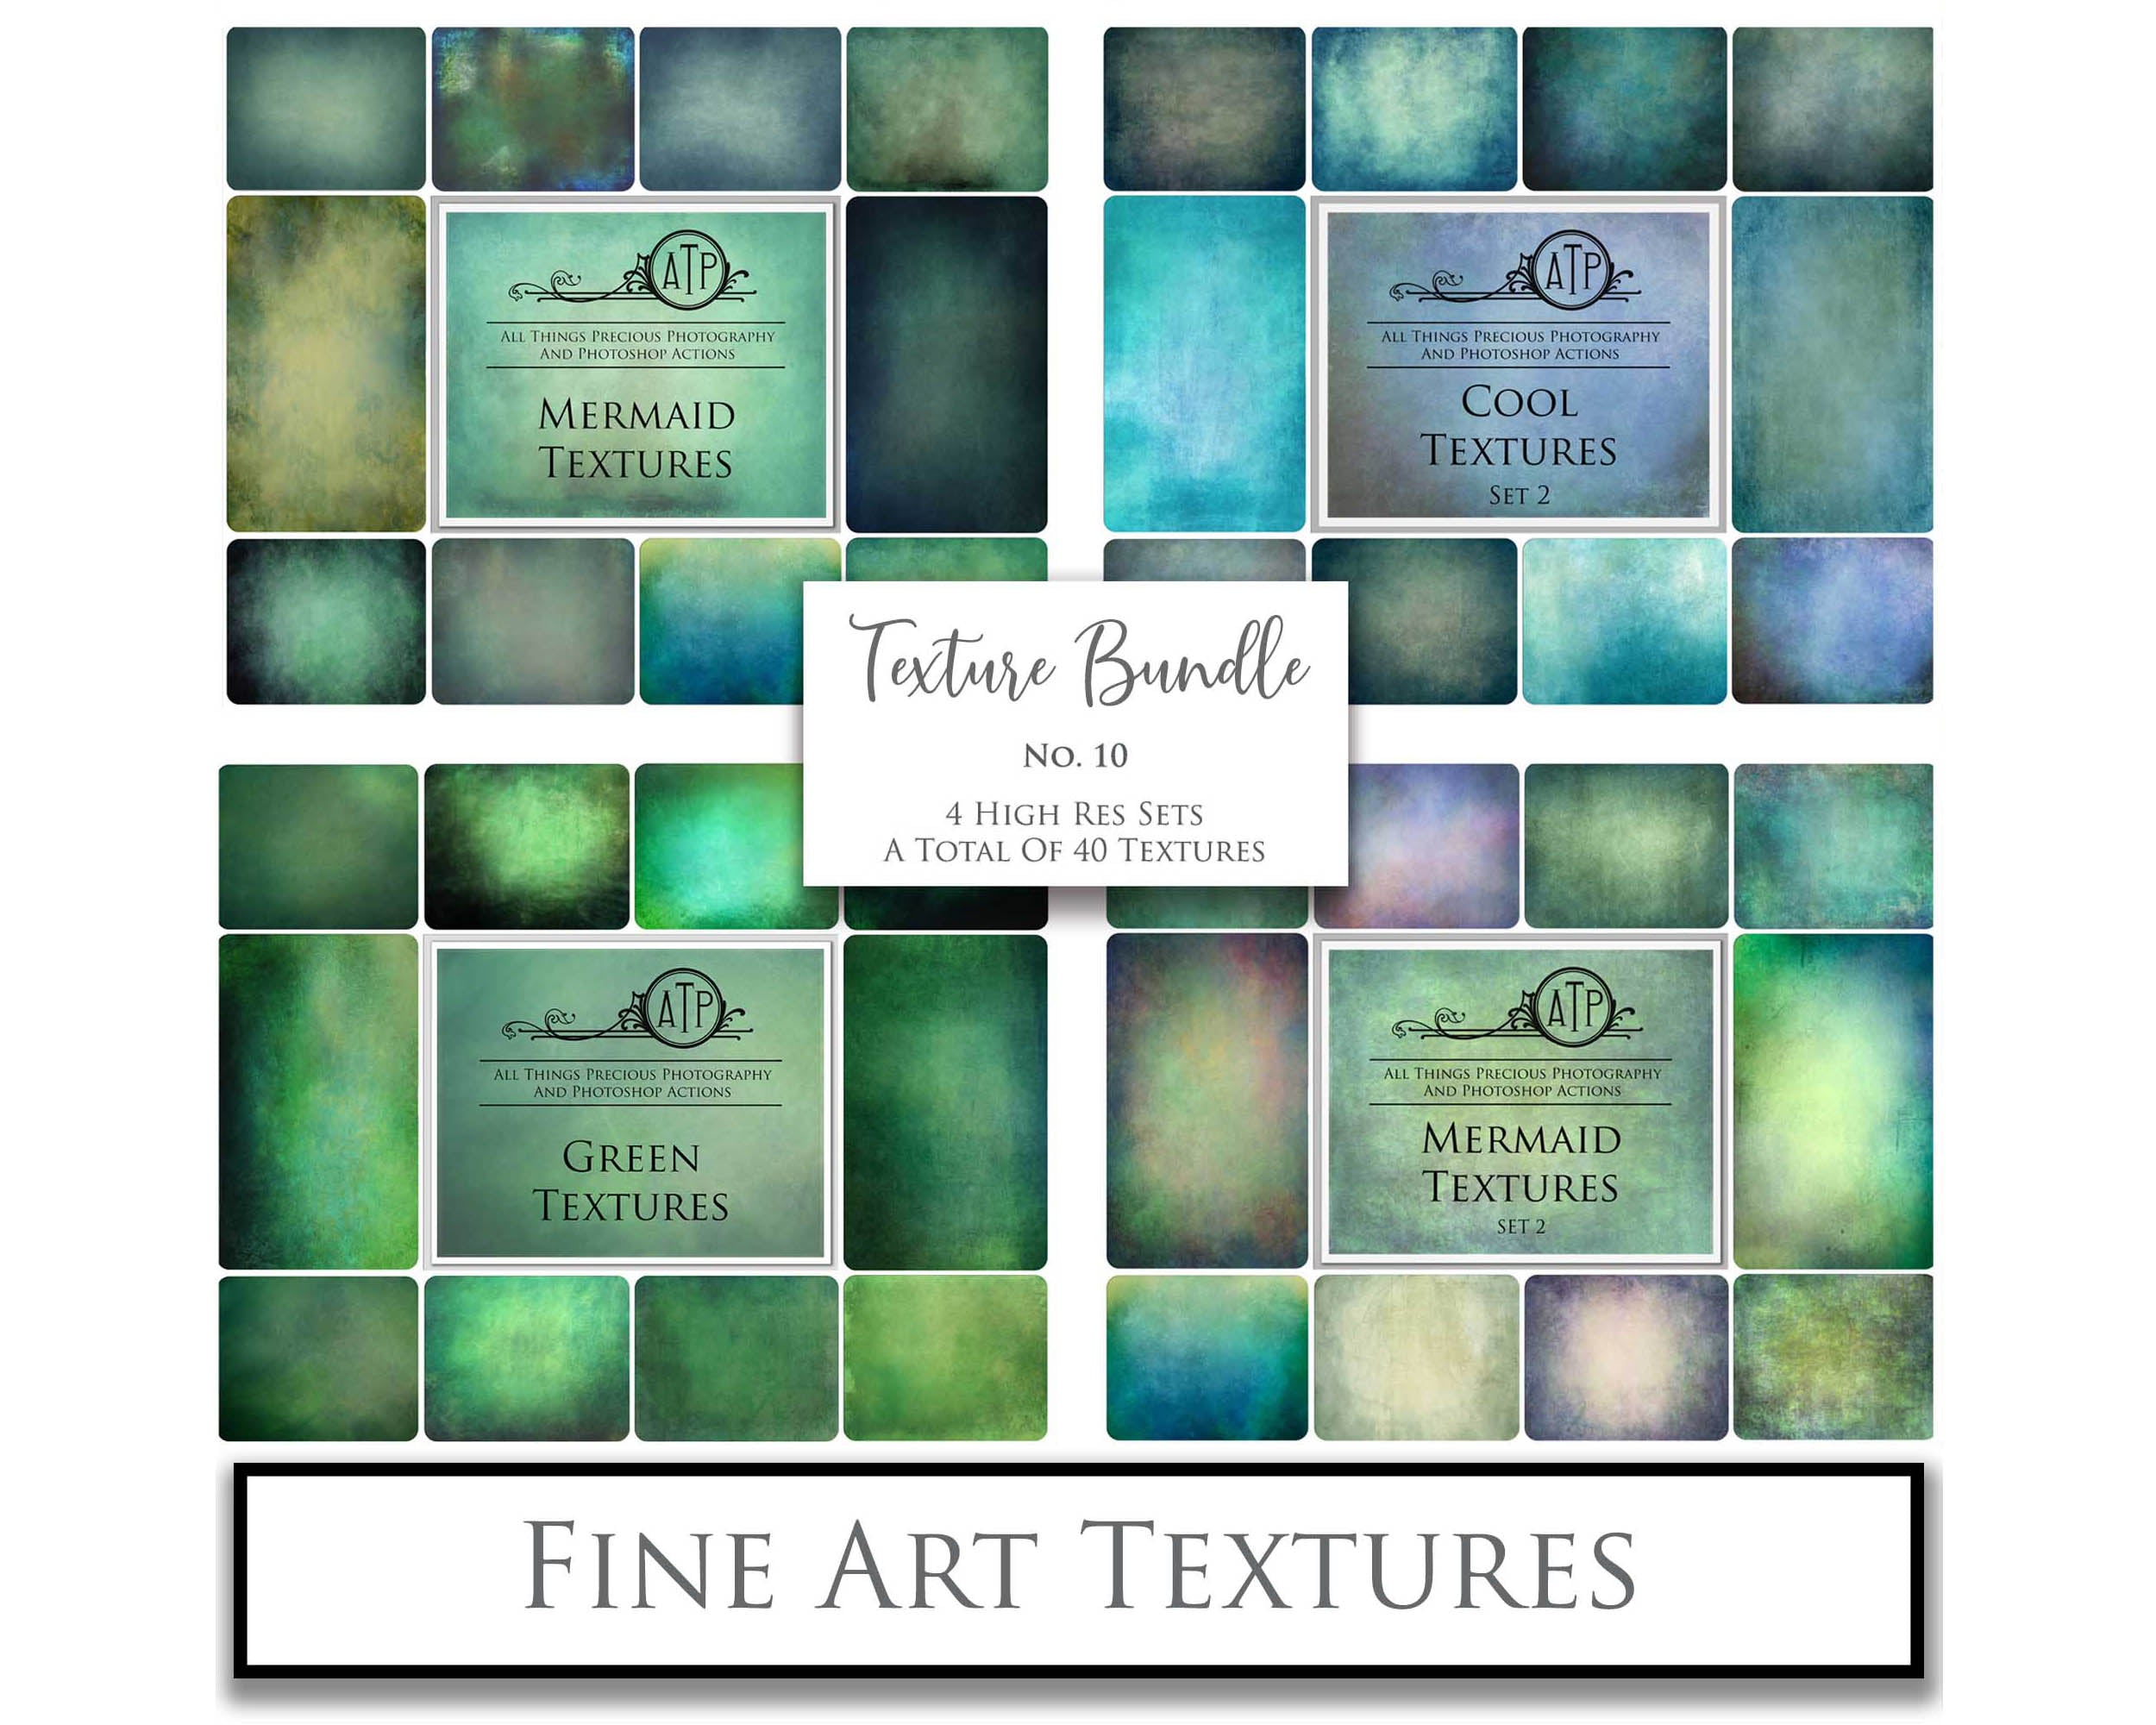 40 High resolution Textures. Png Digital Photo Overlays For Photographers, Photoshop, Digital art and Creatives. Digital photography edits, Photoshop. Photo graphic assets. Grunge, Light, Dark, Old Photo Aged, Scratch, Design Elements. ATP textures. 